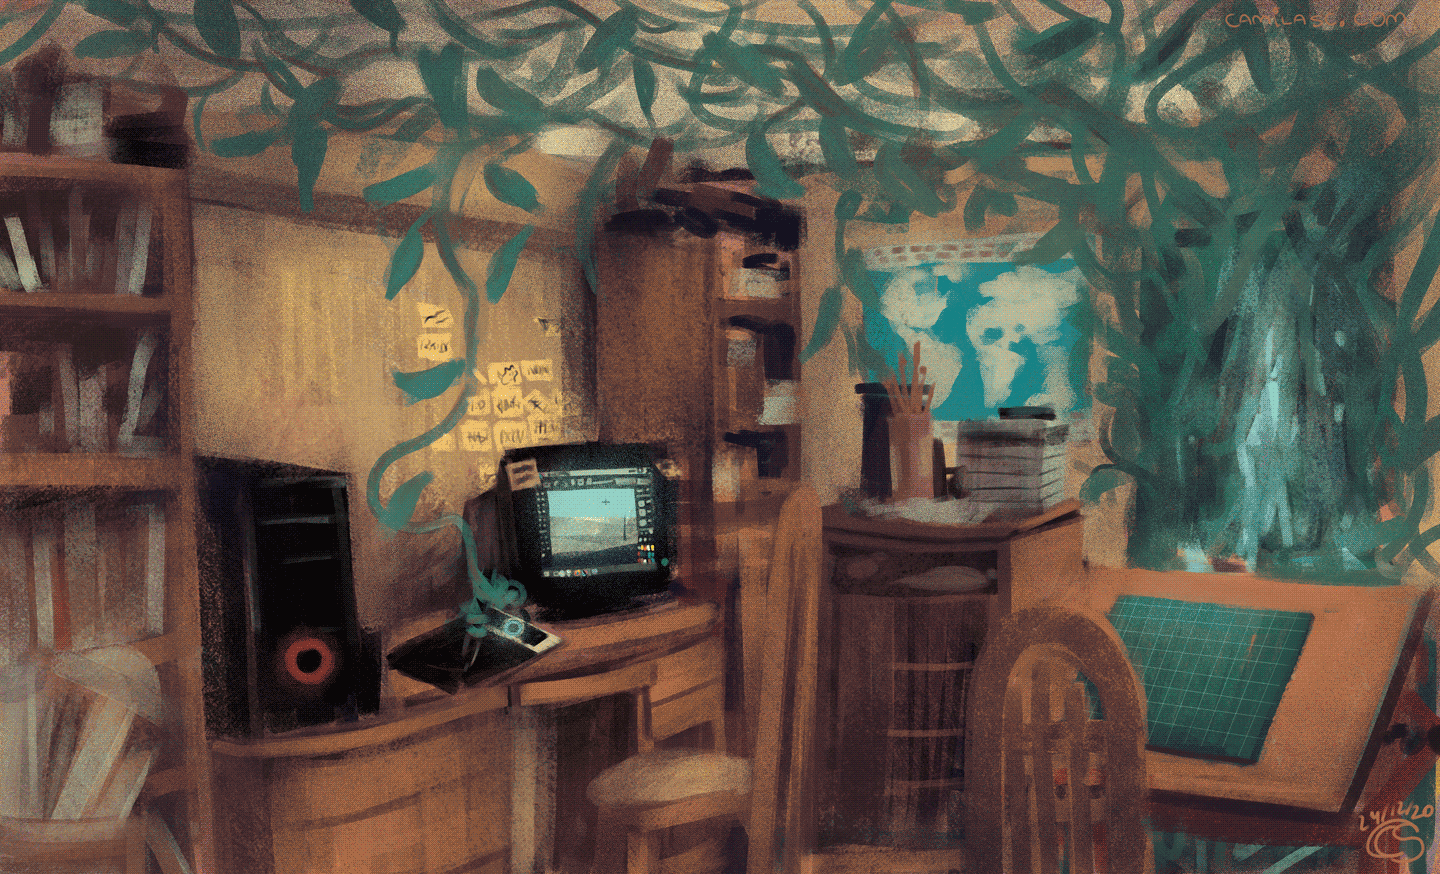 banner image that depicts my own studio, featuring some bookshelves, a world map, and fantasy vines creeping through the window, and picking up an stylus to creat digital art. In big blue letters there's the word 'HOME' splayed across it